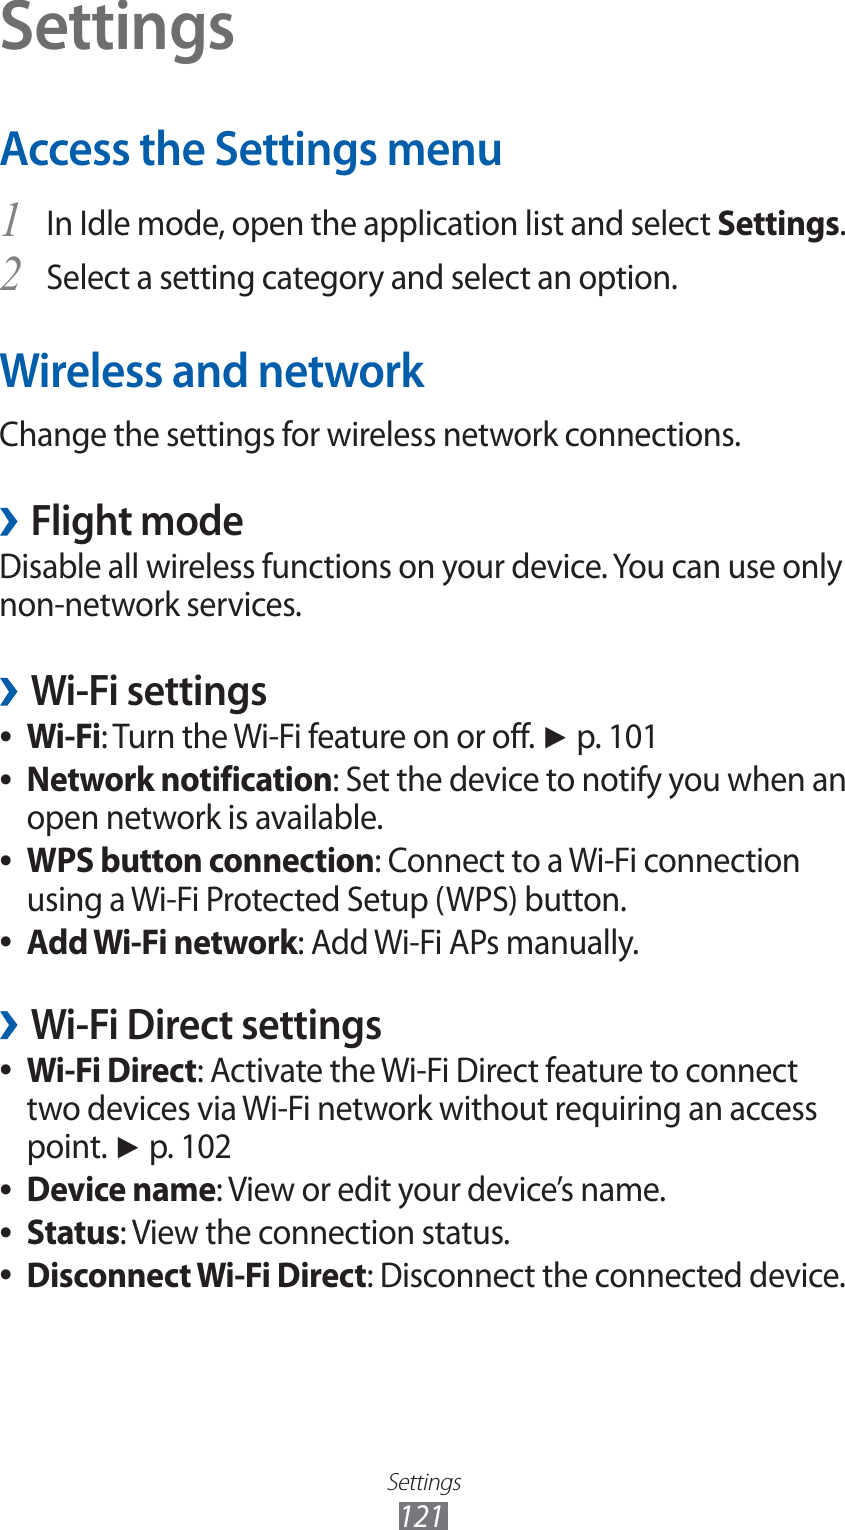 Settings121SettingsAccess the Settings menuIn Idle mode, open the application list and select 1 Settings.Select a setting category and select an option.2 Wireless and networkChange the settings for wireless network connections.Flight mode ›Disable all wireless functions on your device. You can use only non-network services.Wi-Fi settings ›Wi-Fi ●: Turn the Wi-Fi feature on or off. ► p. 101Network notification ●: Set the device to notify you when an open network is available.WPS button connection ●: Connect to a Wi-Fi connection using a Wi-Fi Protected Setup (WPS) button.Add Wi-Fi network ●: Add Wi-Fi APs manually.Wi-Fi Direct settings ›Wi-Fi Direct ●: Activate the Wi-Fi Direct feature to connect two devices via Wi-Fi network without requiring an access point. ► p. 102Device name ●: View or edit your device’s name.Status ●: View the connection status.Disconnect Wi-Fi Direct ●: Disconnect the connected device.